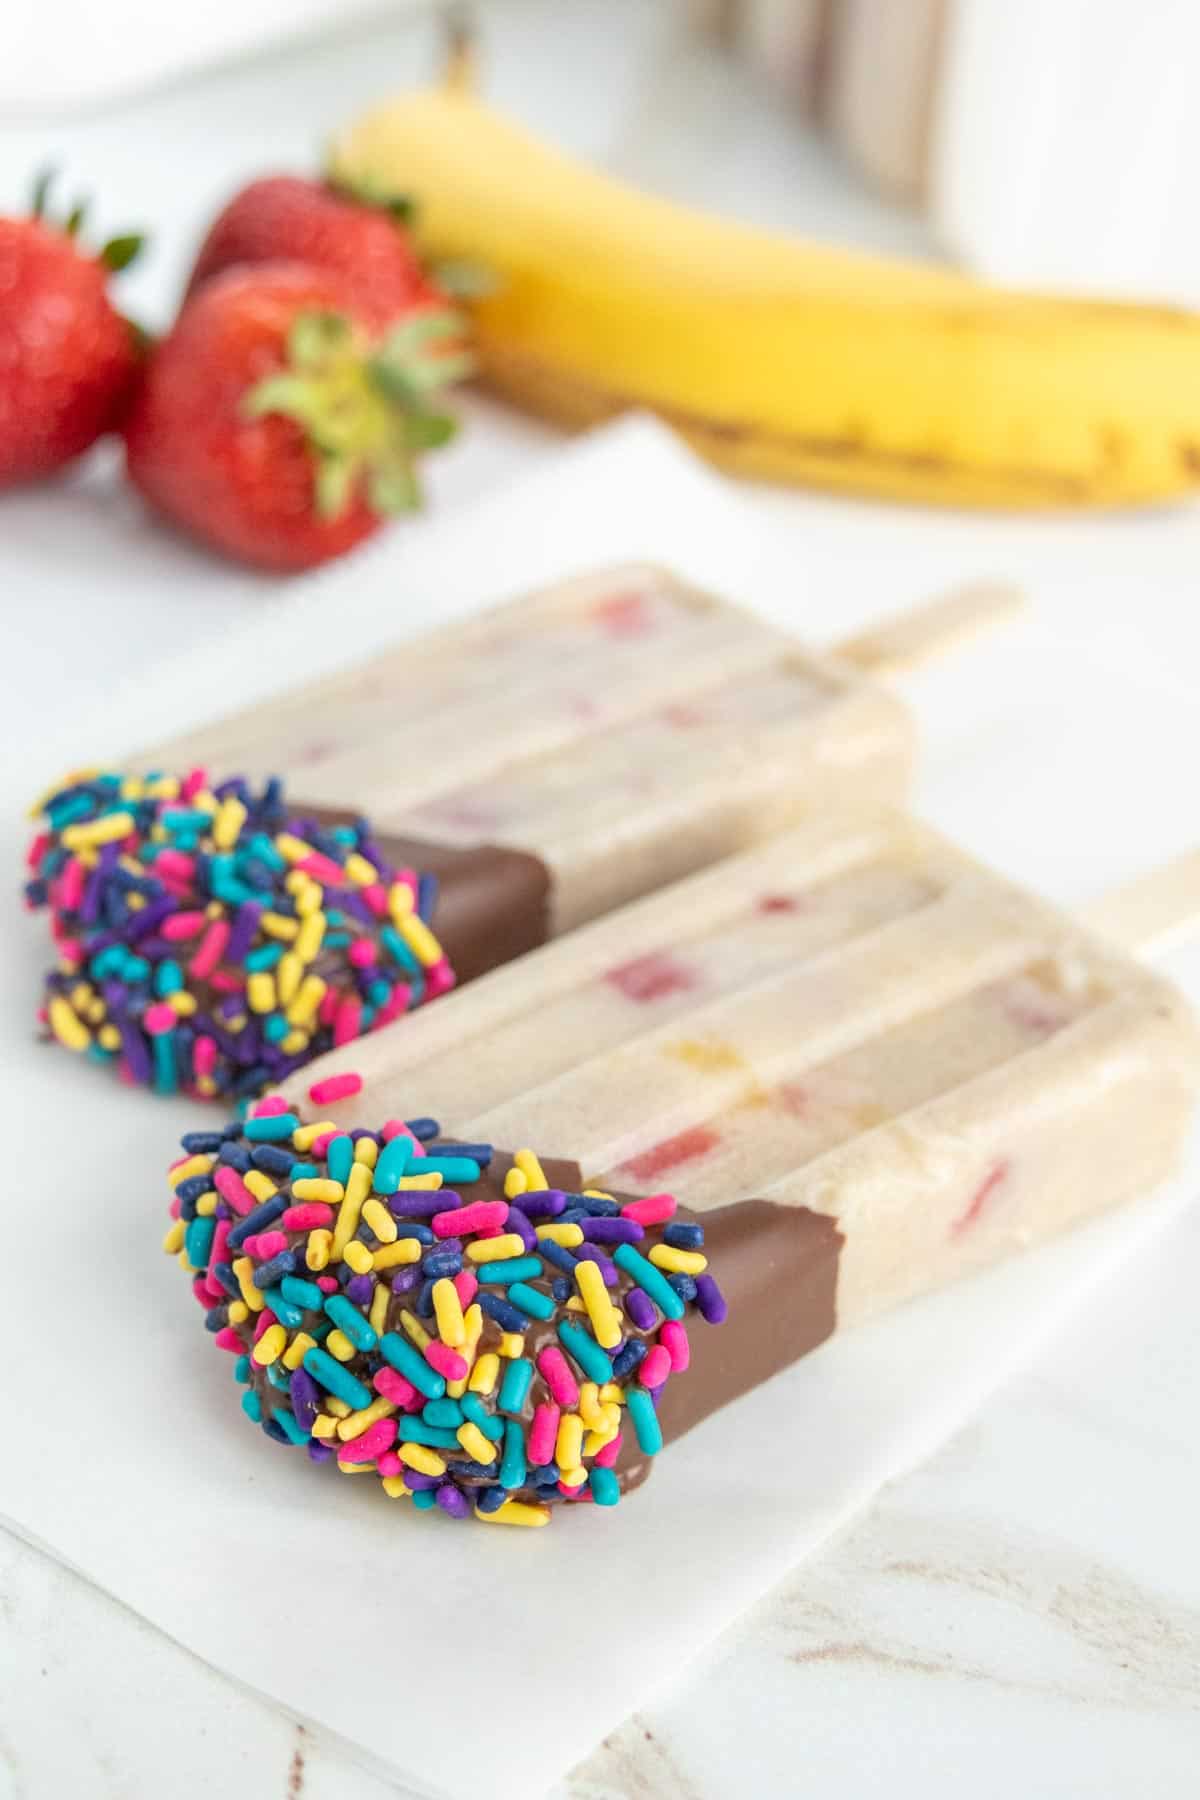 Banana Popsicles with Strawberries and Pineapple